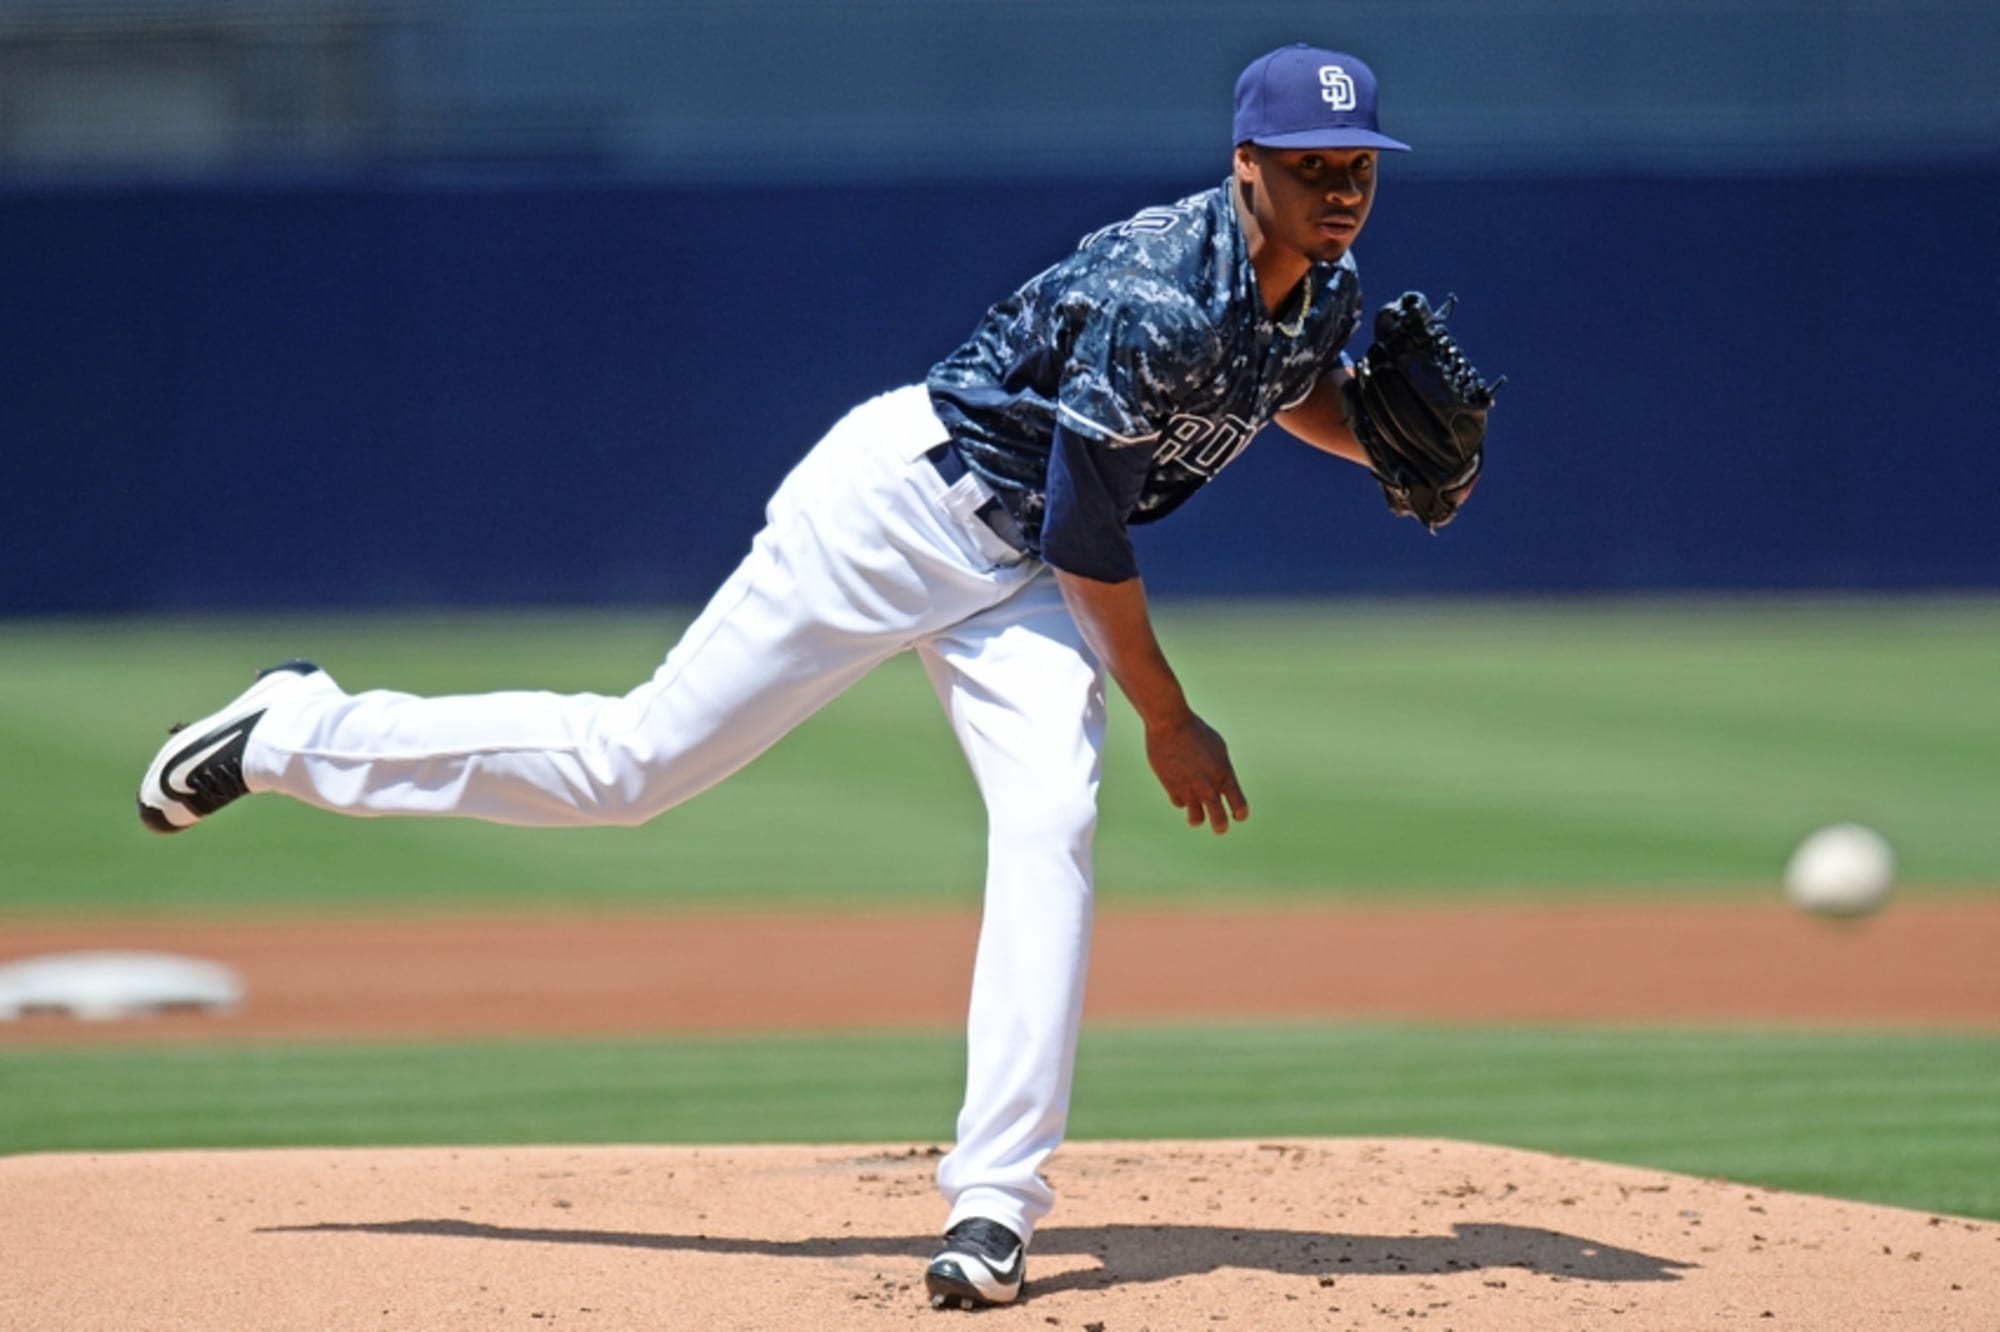 San Diego Padres starting pitcher Luis Perdomo works against an